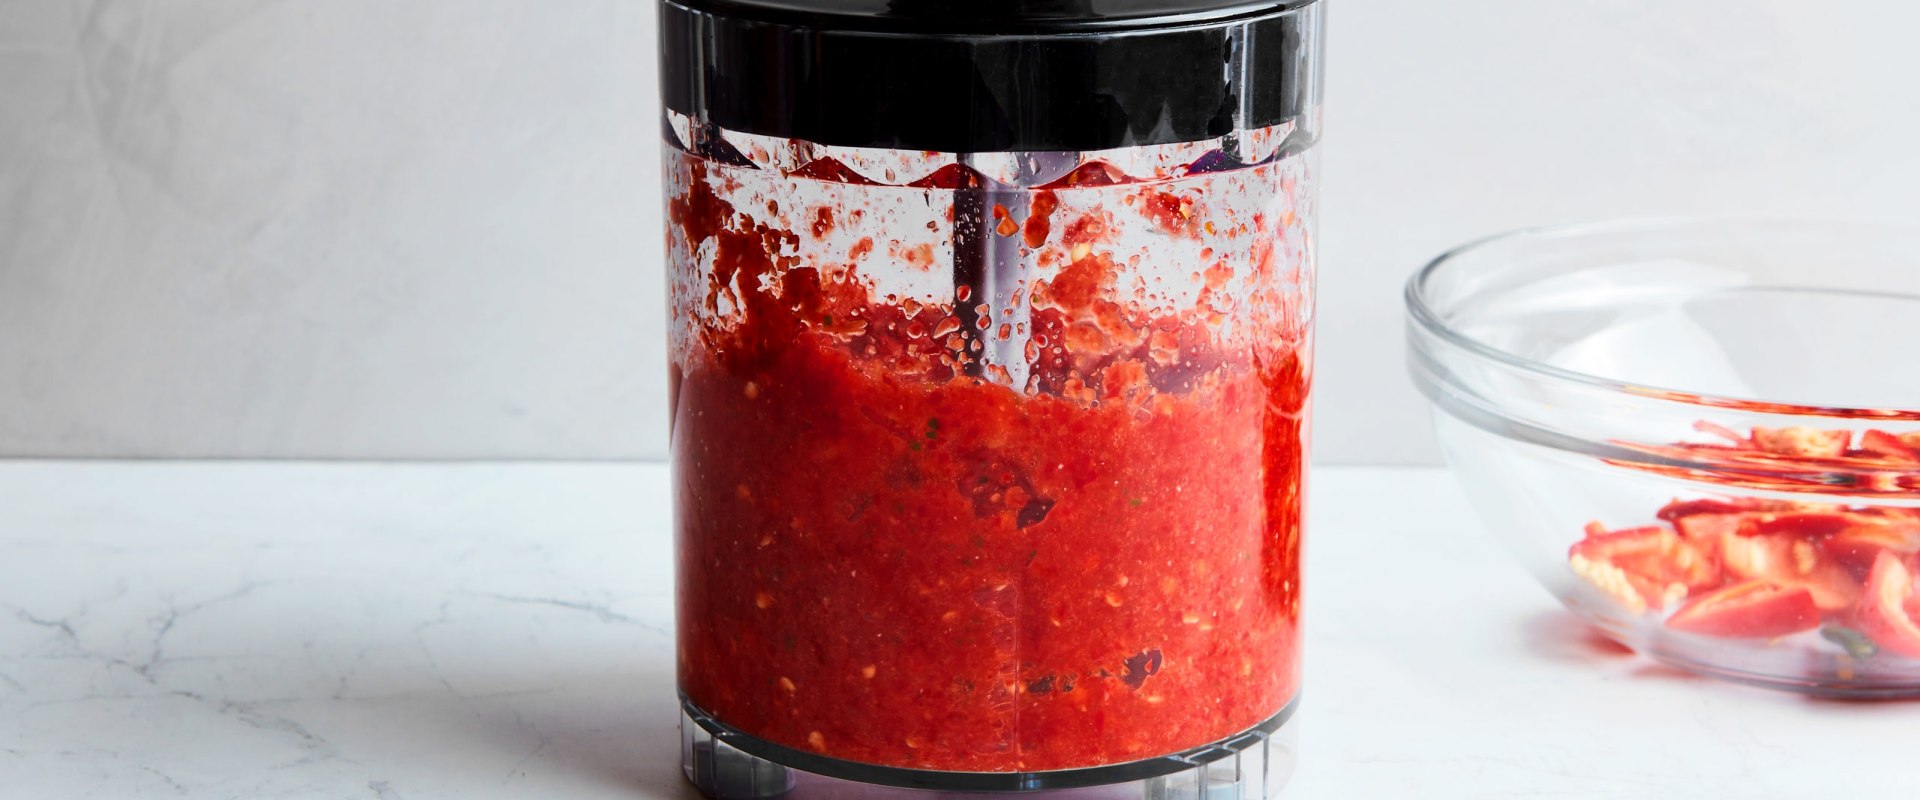 How to Make Chili Sauce with a Blender